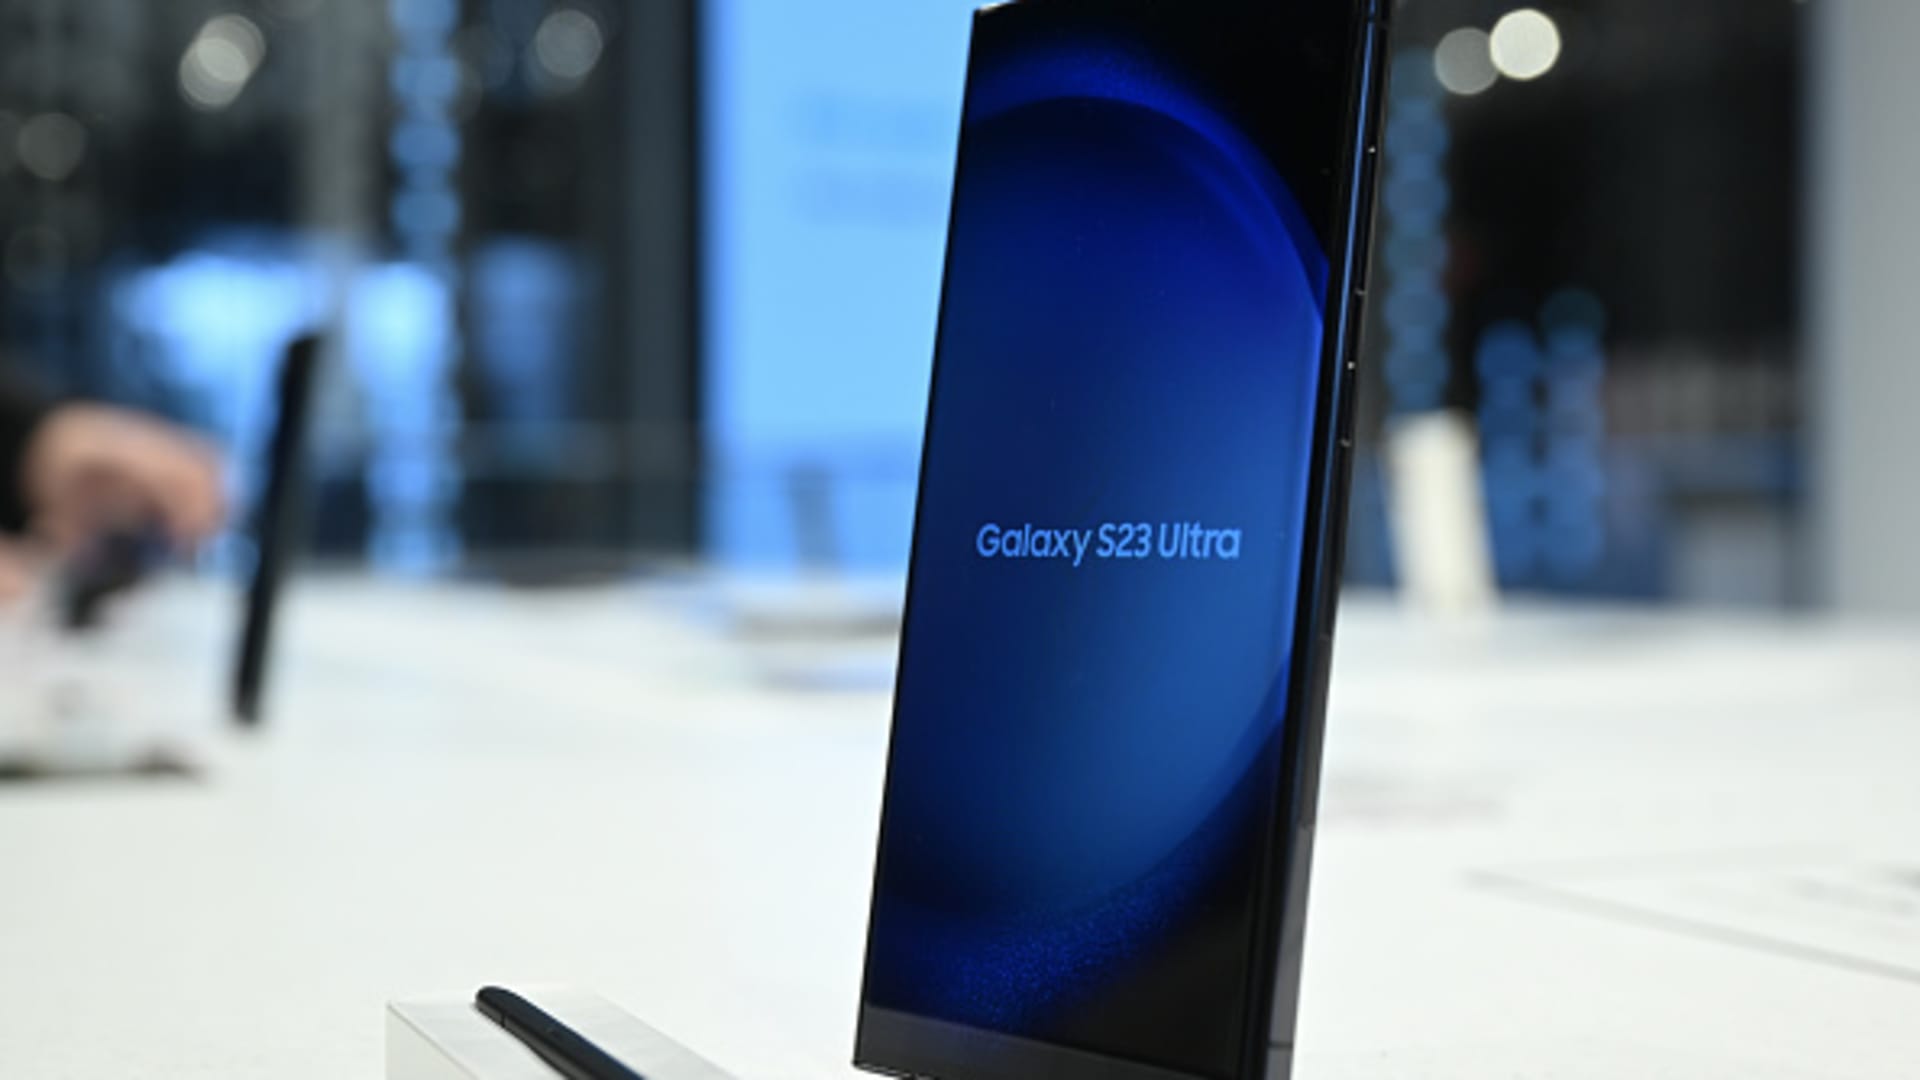 Samsung Galaxy S23 Ultra spotted selling in a retail store -   news